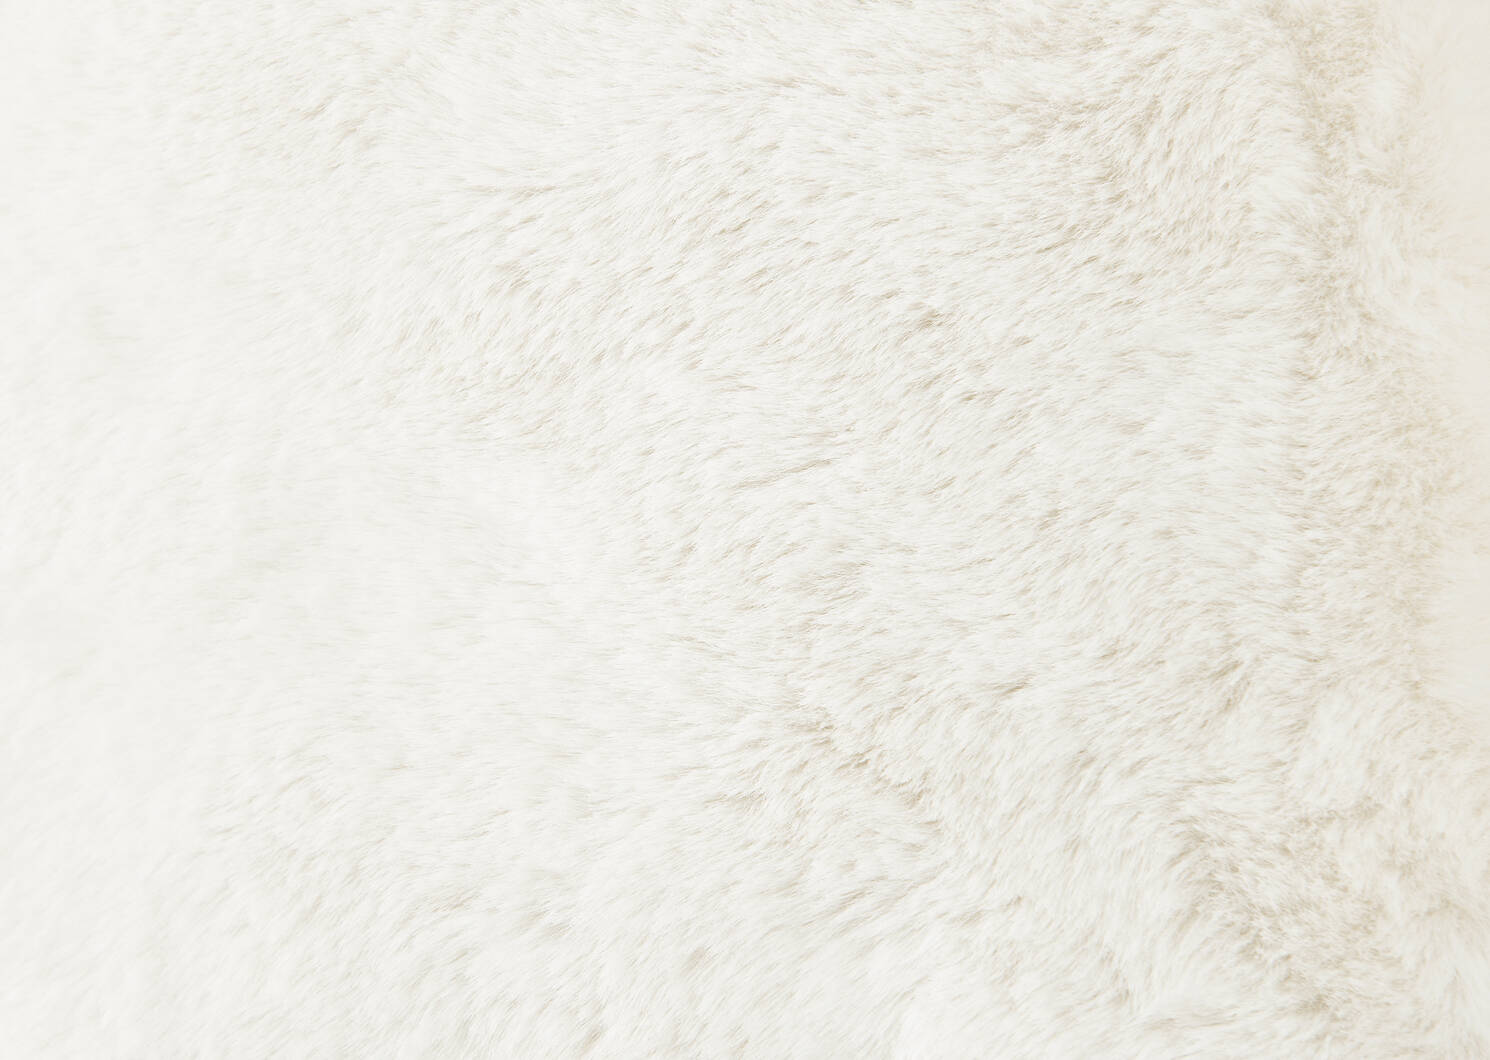 Cate Faux Fur Pillow 24x24 Ivory